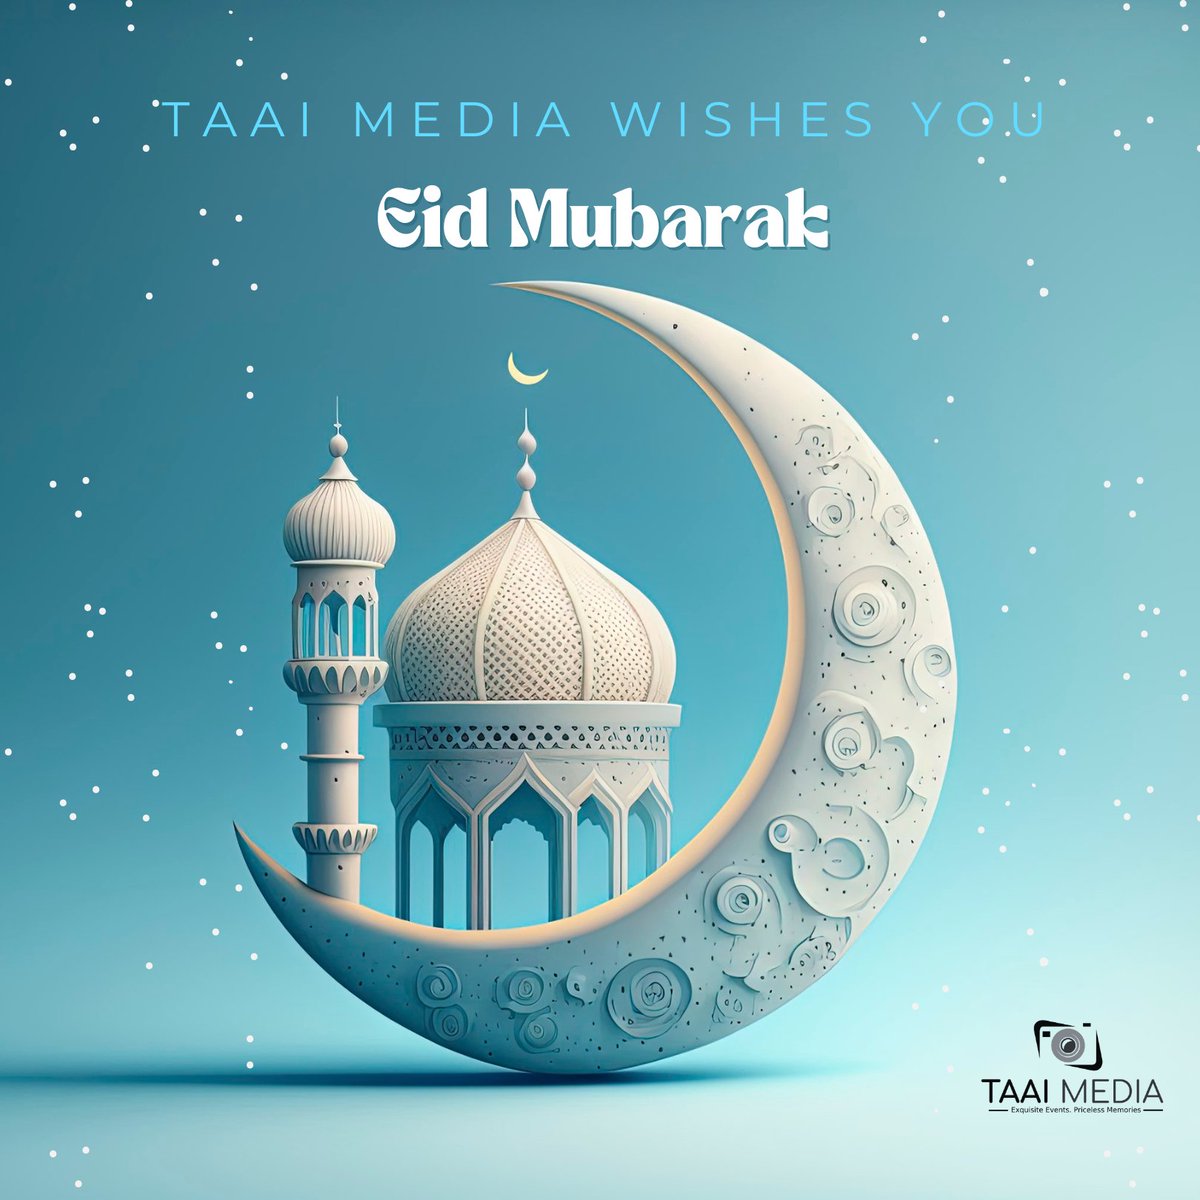 May the joy of Eid fill your hearts and your homes. #EidMubarak #Muslims